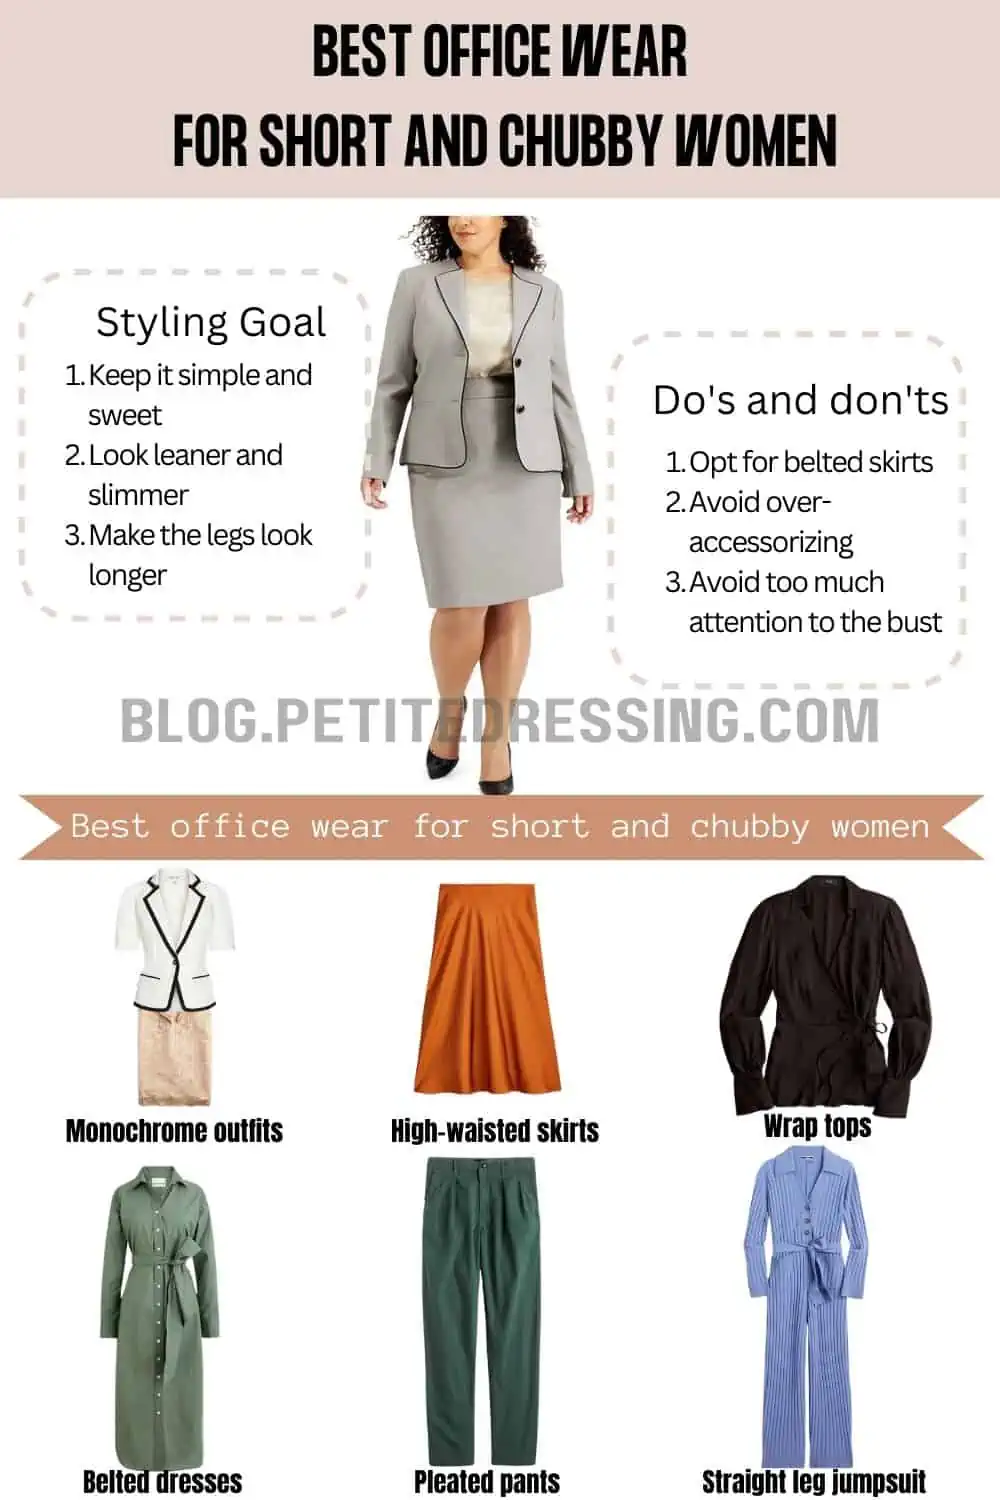 Officewear guide for short and chubby women - Petite Dressing